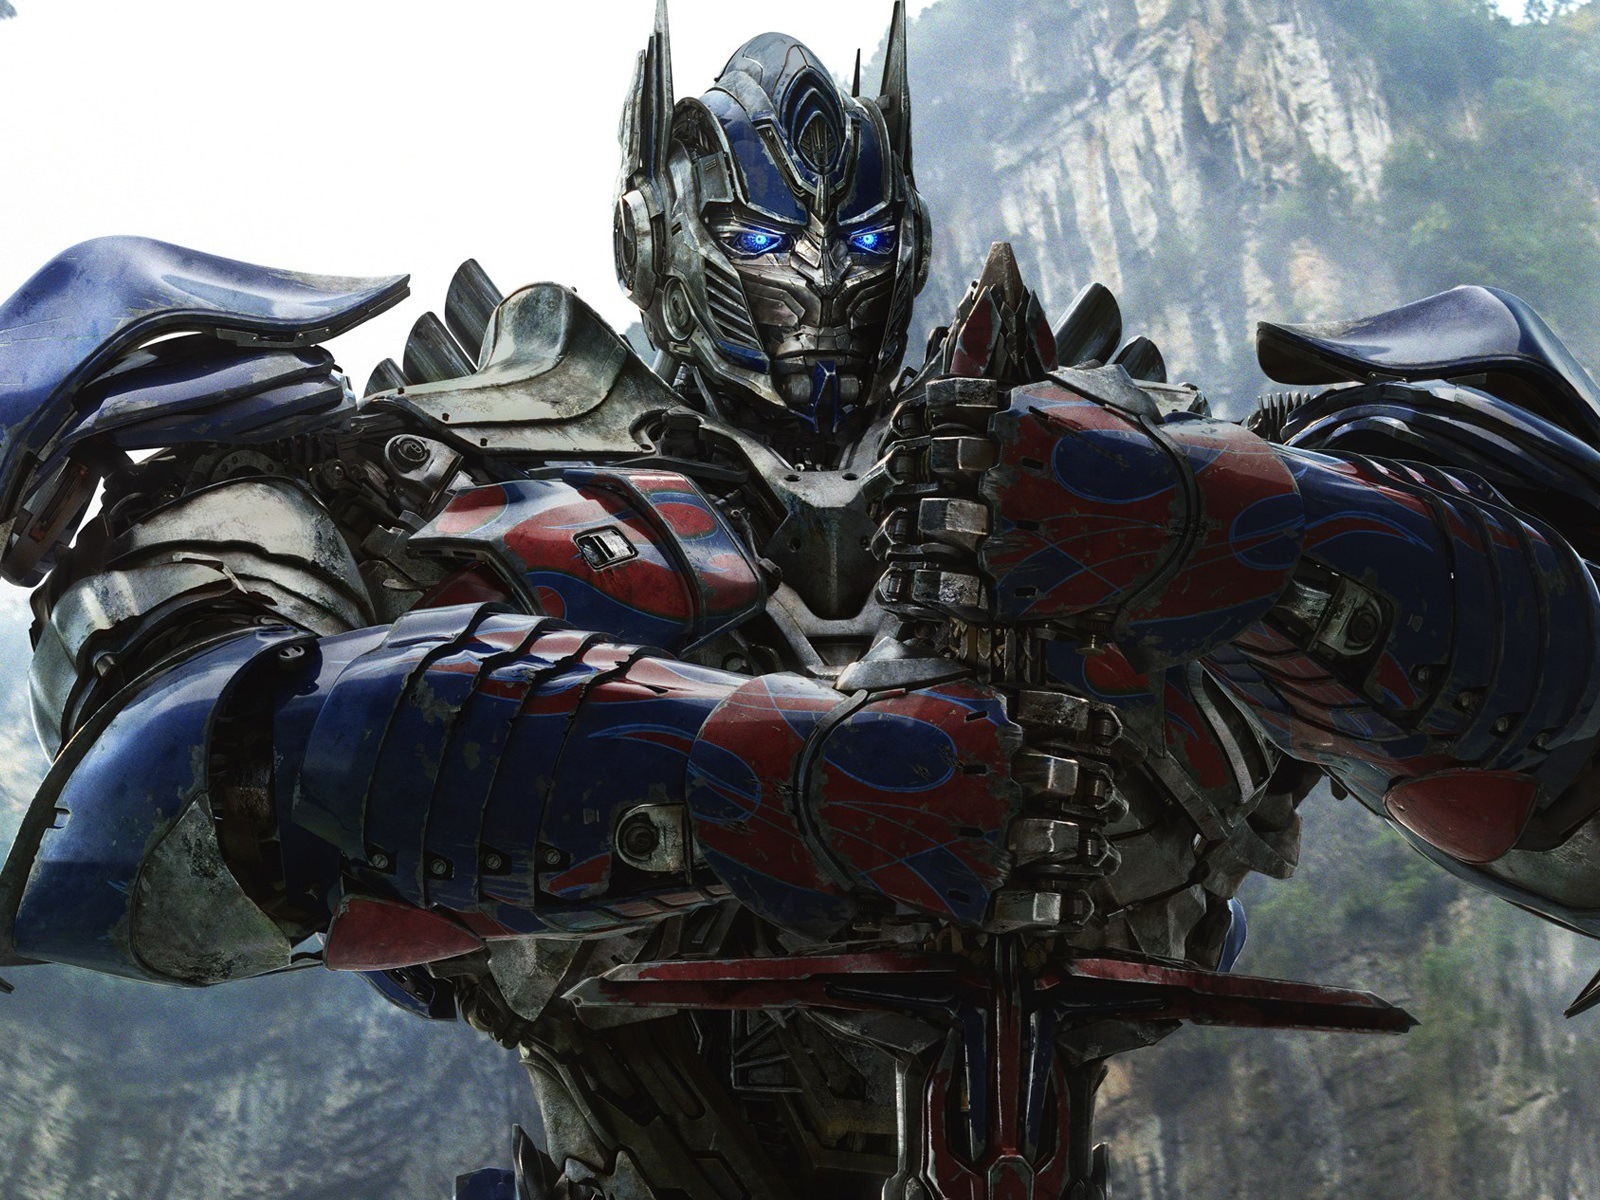 2014 Transformers: Age of Extinction HD tapety #10 - 1600x1200